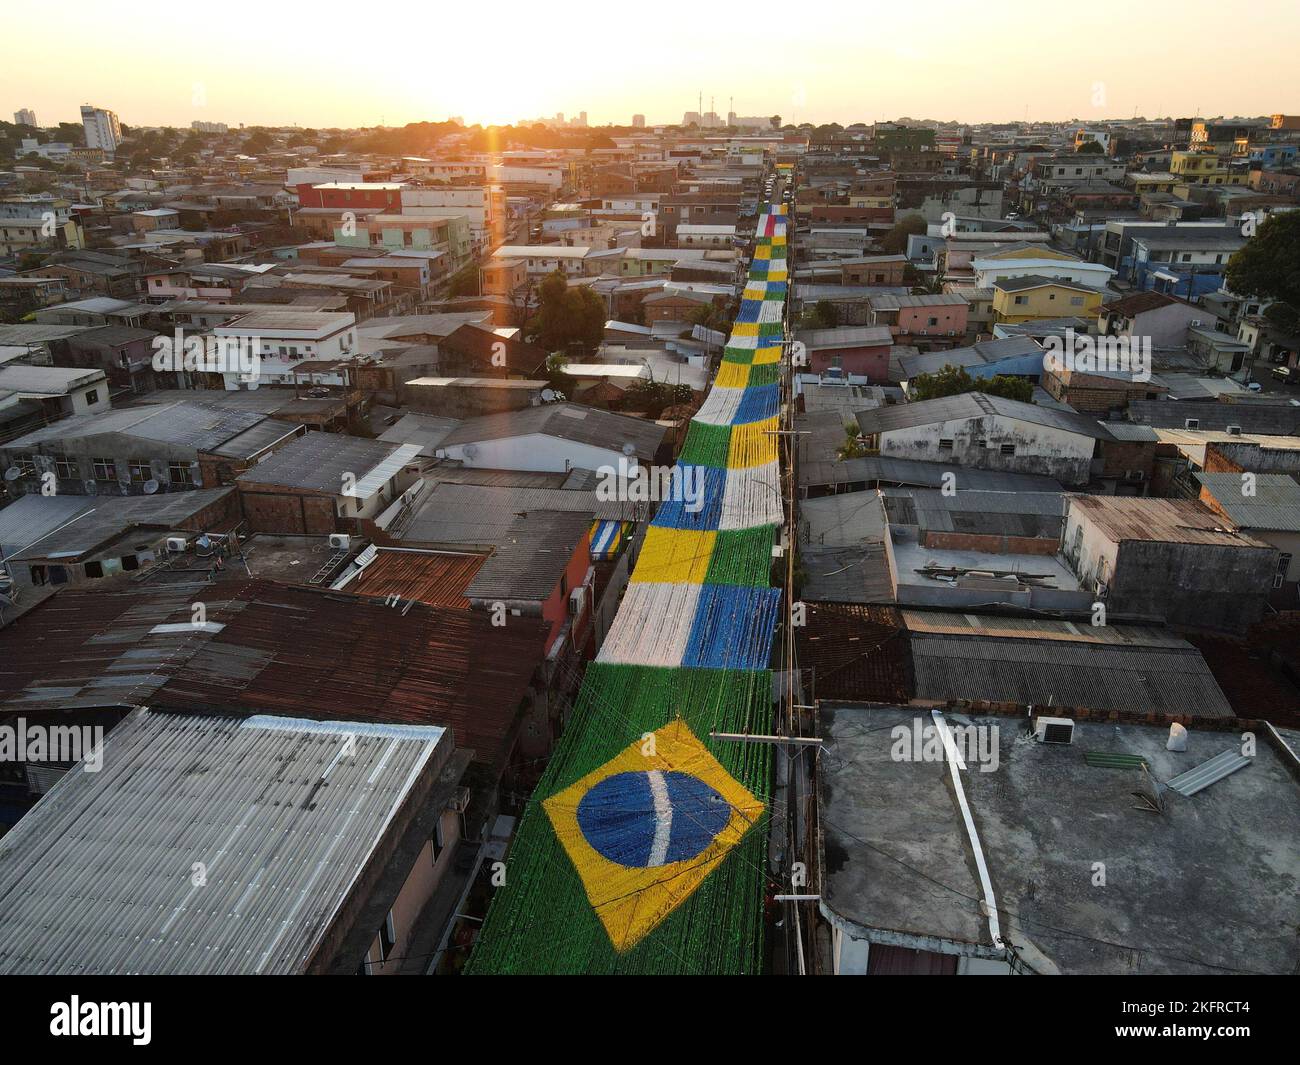 A general view of a street decorated for the upcoming 2022 FIFA World Cup Qatar, in the Alvorada neighborhood in Manaus, Amazonas state, Brazil November 19, 2022. REUTERS/Bruno Kelly Stock Photo